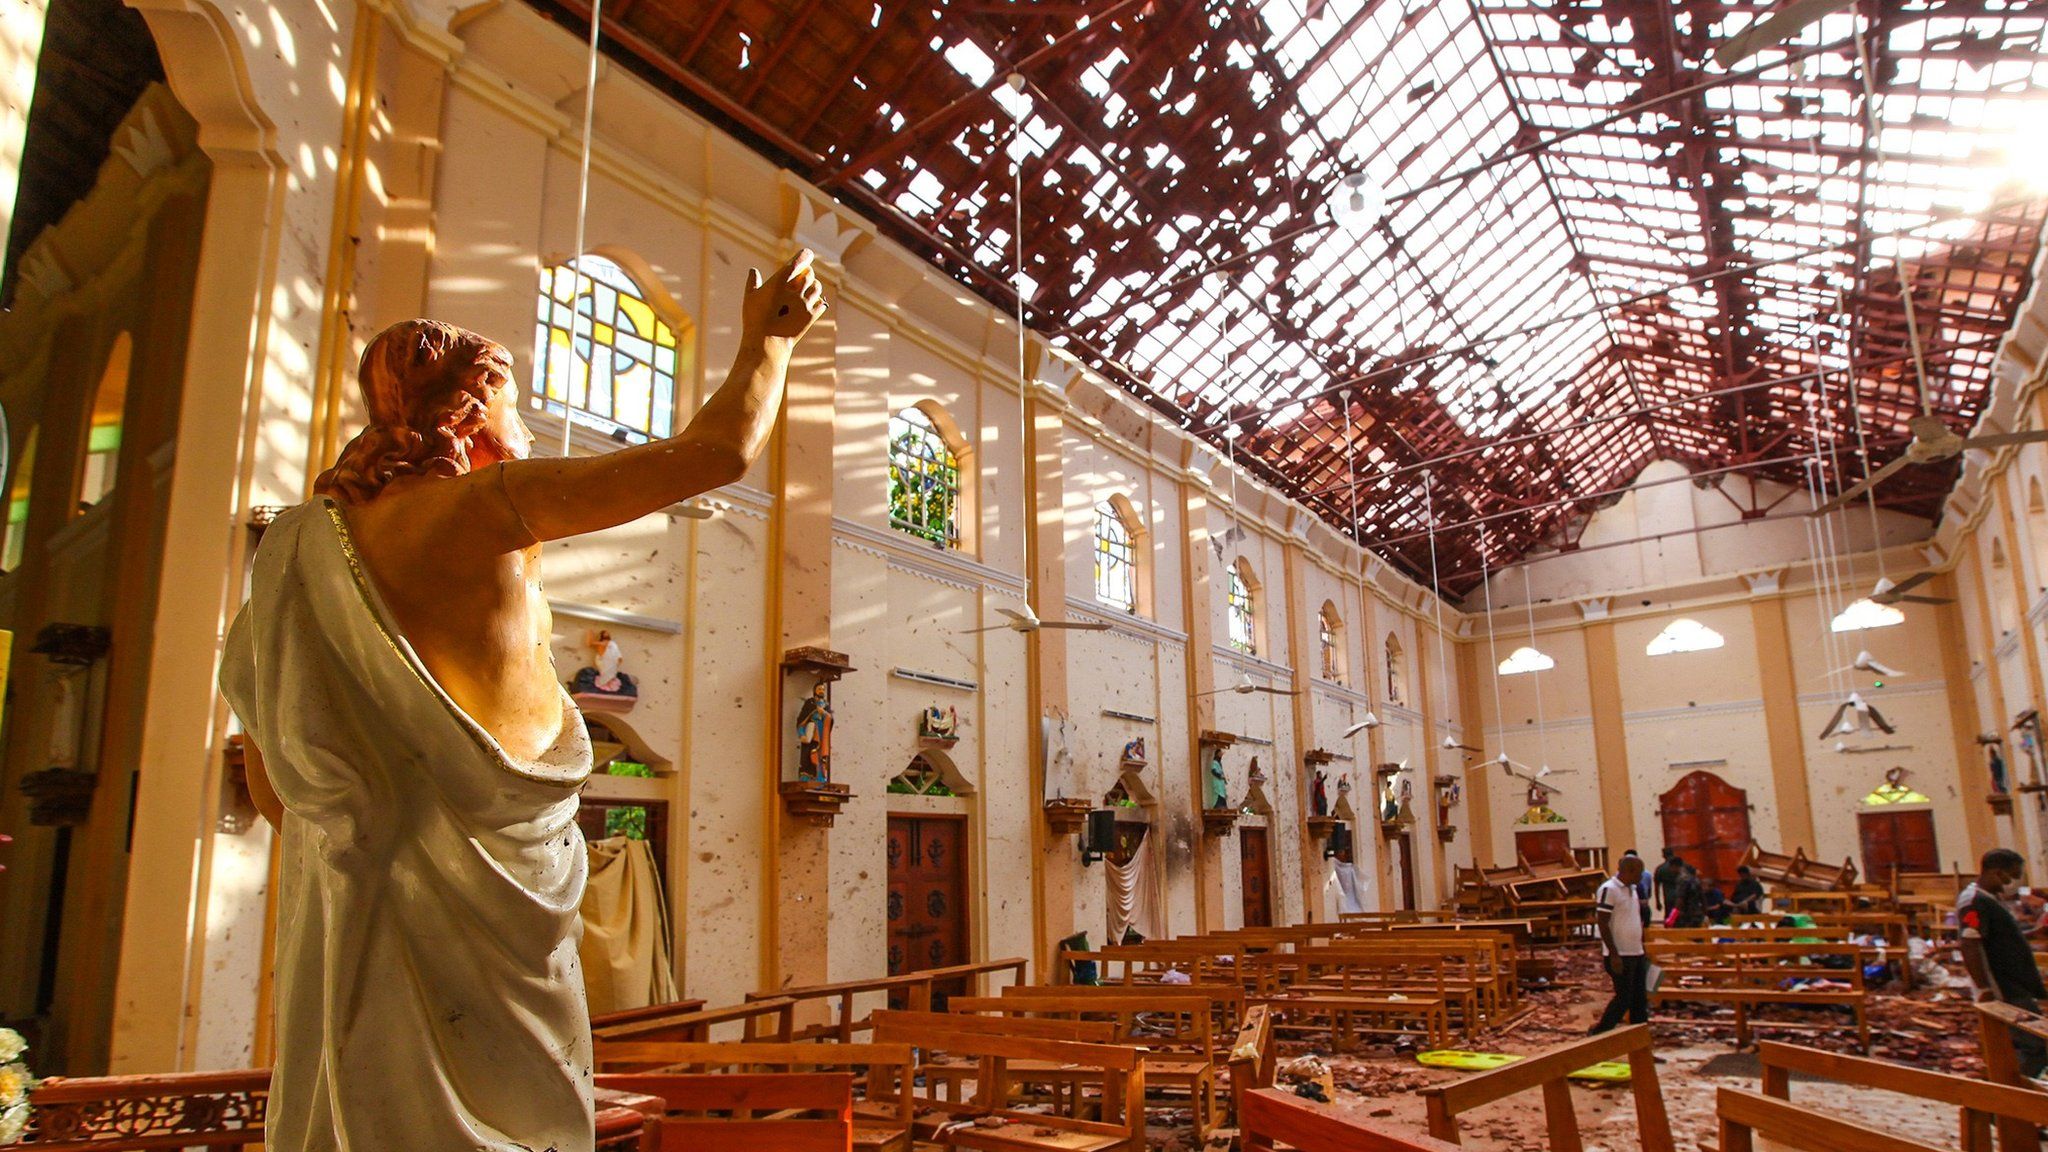 Officials inspect the damaged St. Sebastian's Church after multiple explosions targeting churches and hotels across Sri Lanka on April 21, 2019 in Negombo, north of Colombo, Sri Lanka.